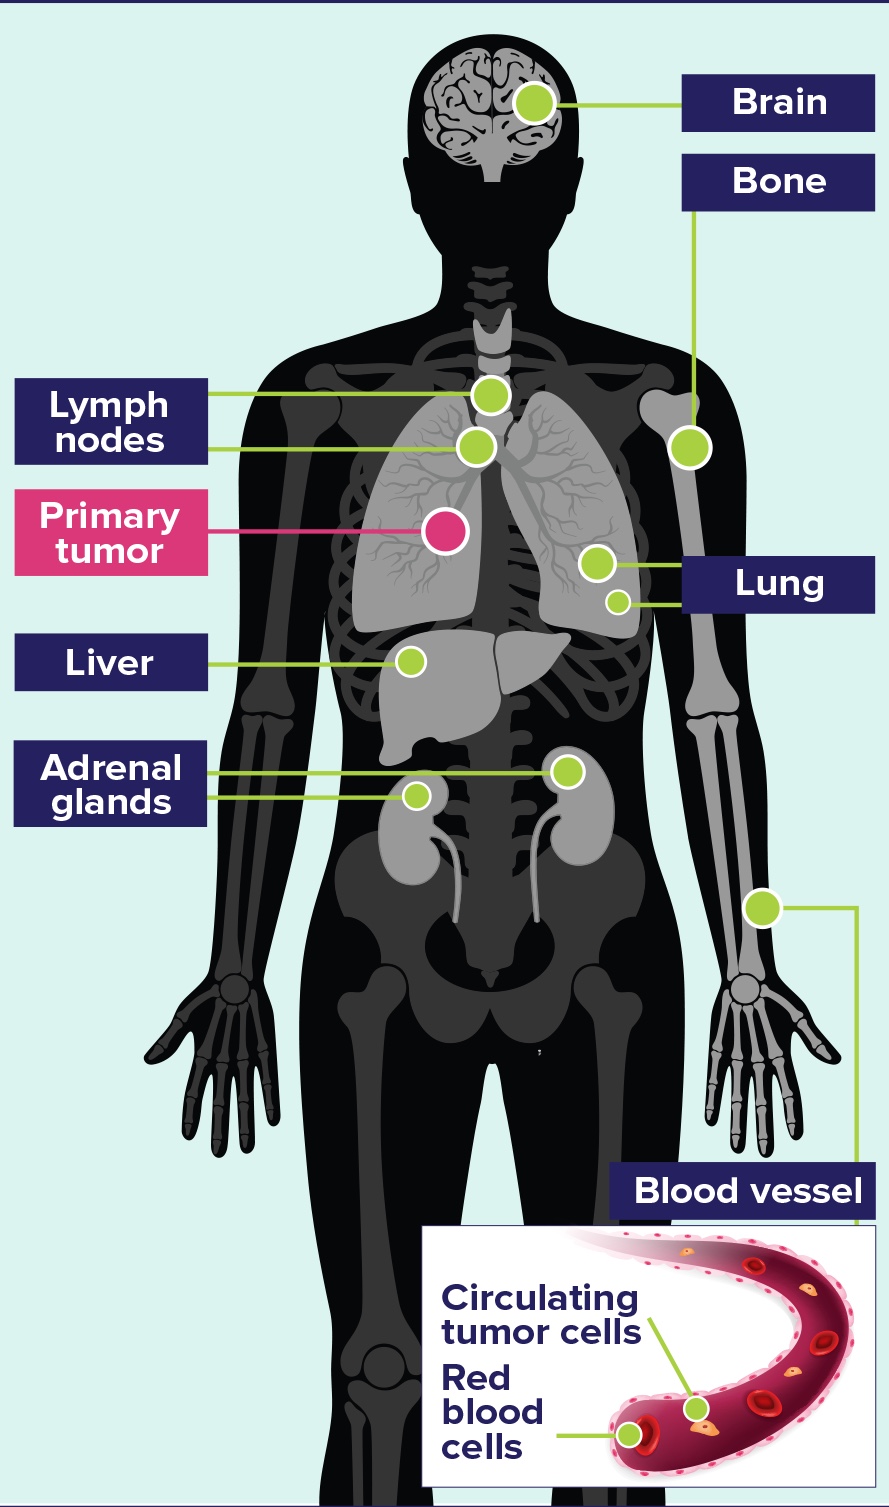 Common Sites of Metastases in Small Cell Lung Cancer (SCLC) Diagram